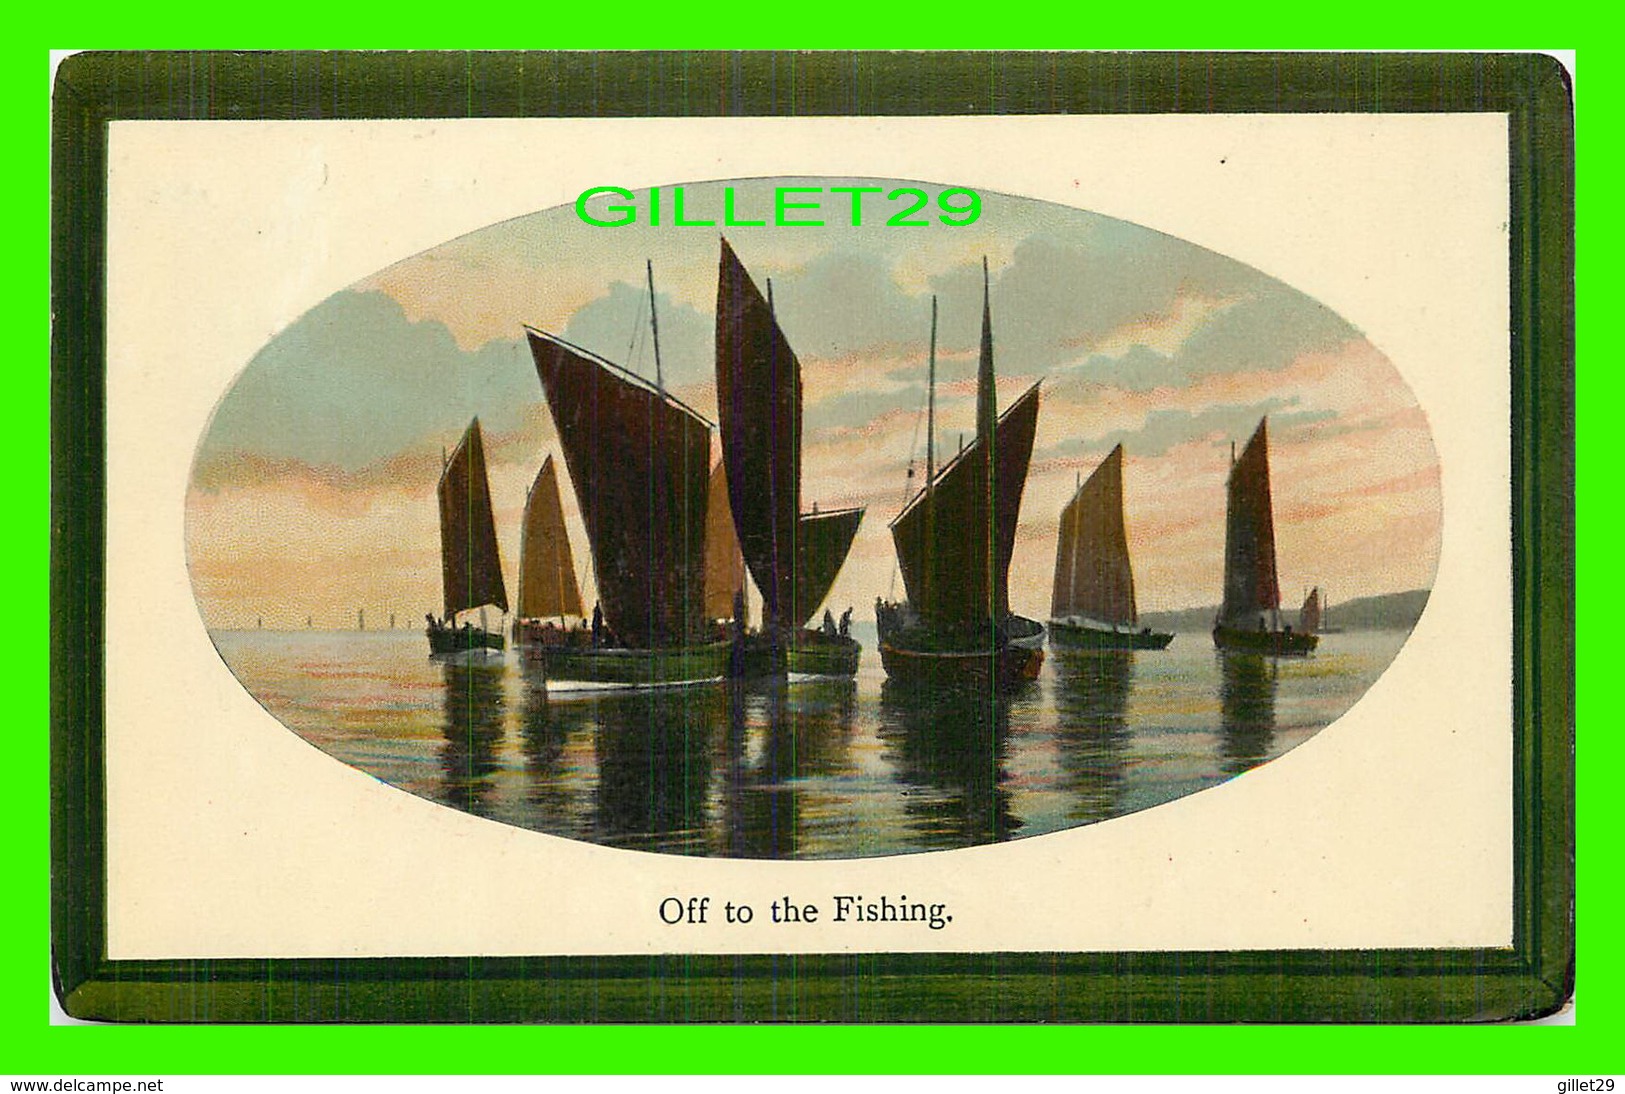 SAILS, VOILIERS - OFF TO THE FISHING - TRAVEL IN 1910 - NATIONAL SERIES - - Velieri